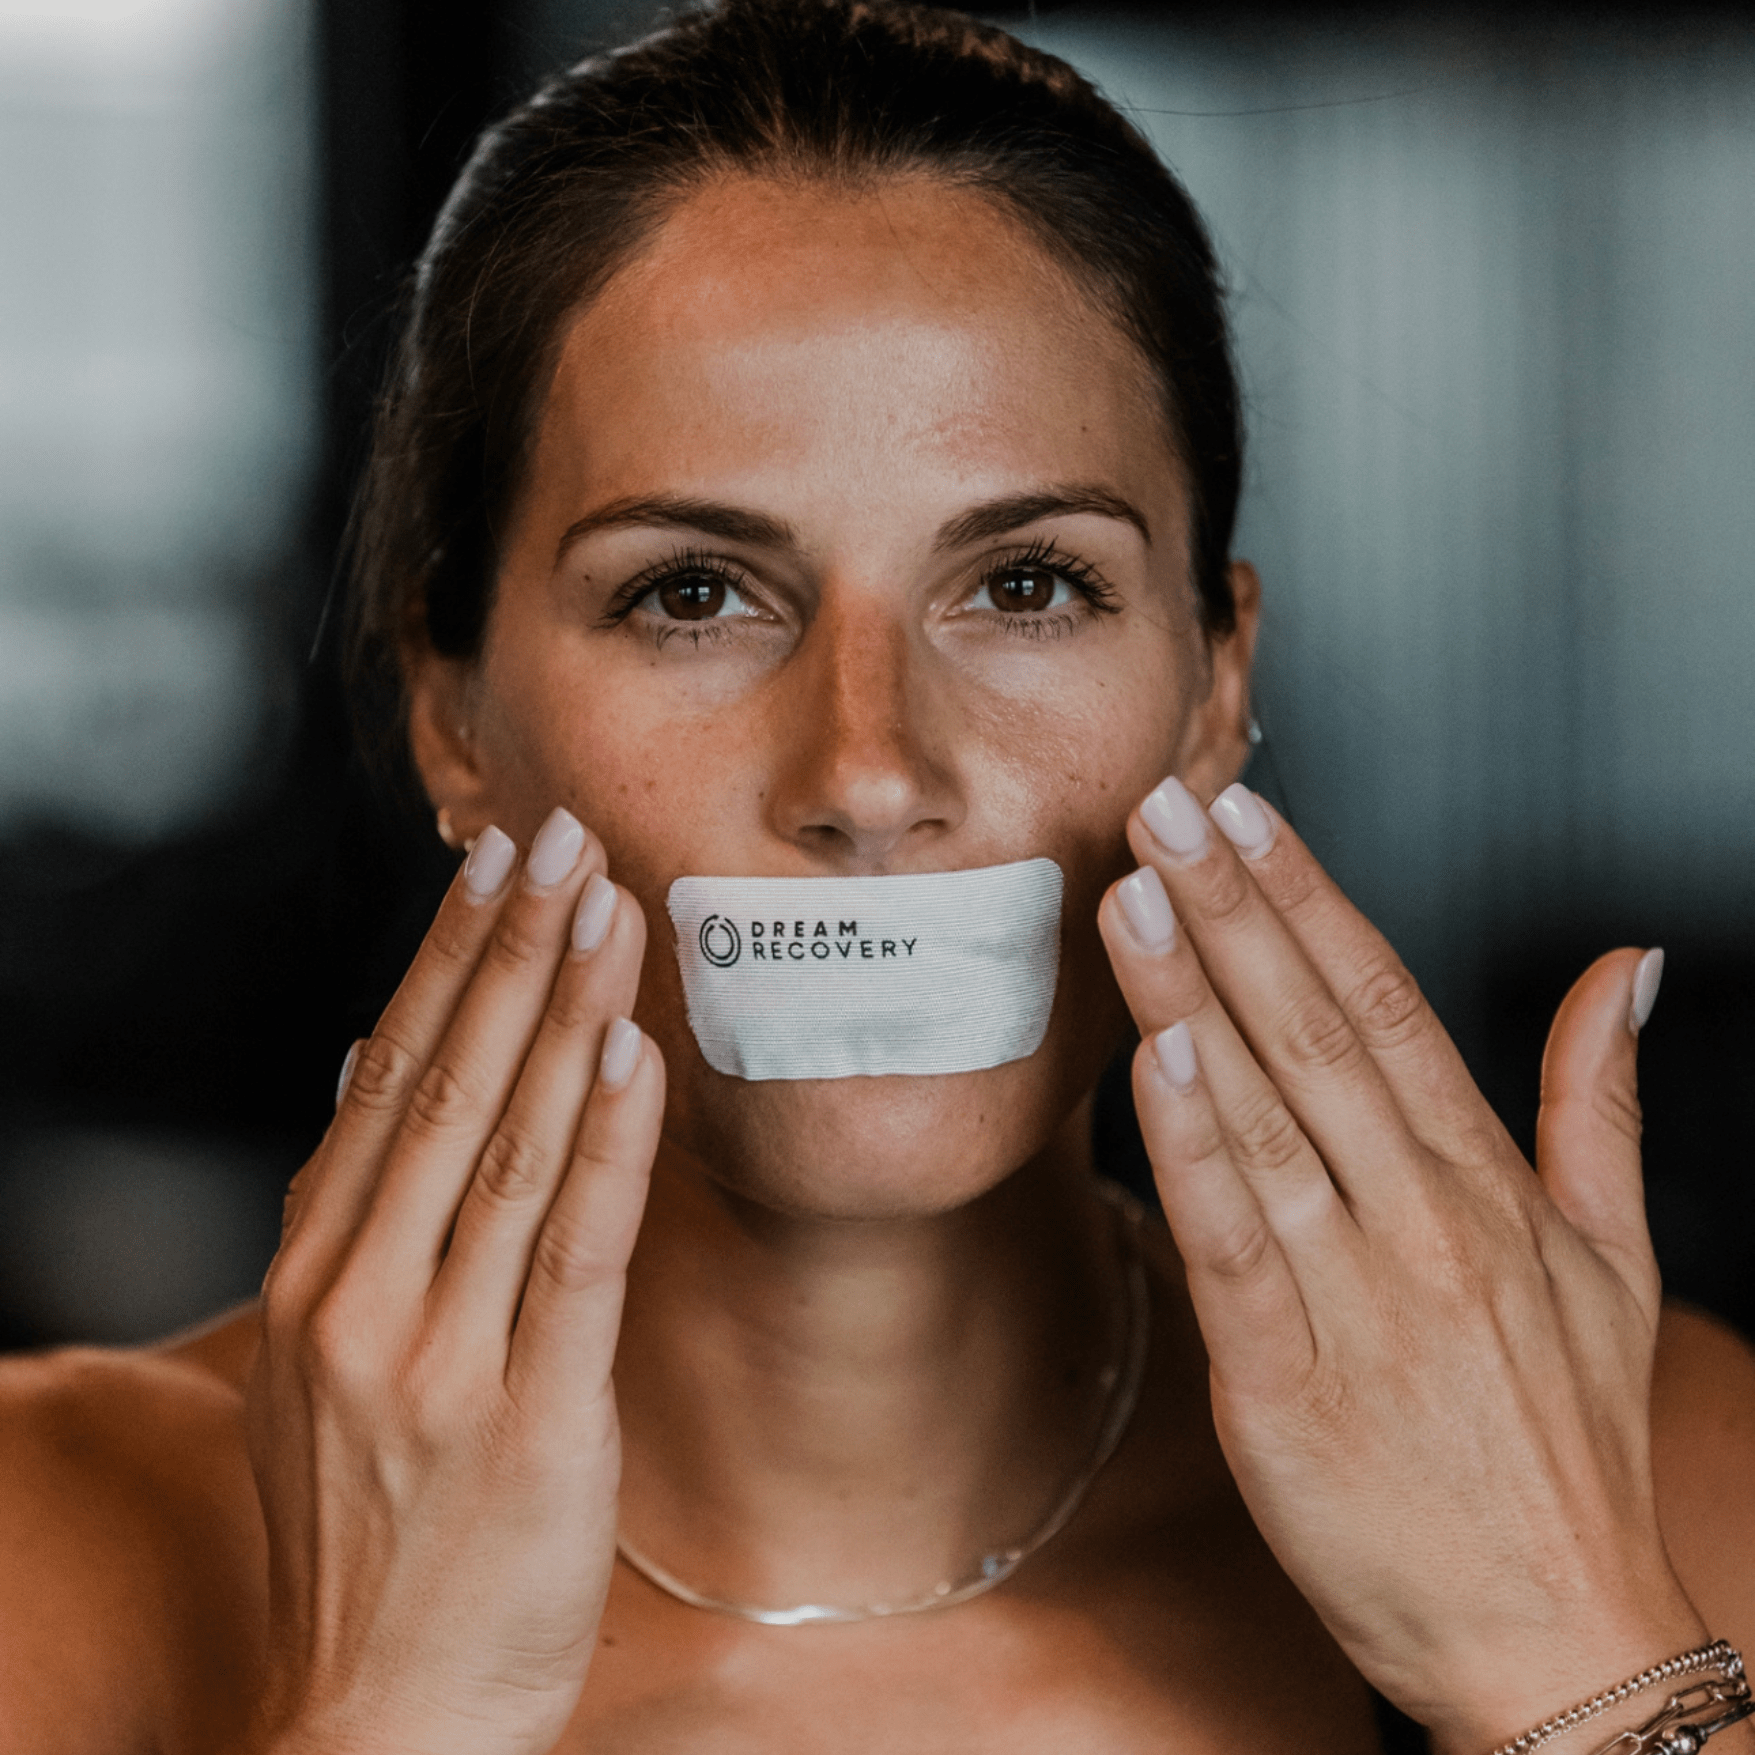 Dream Mouth Tape, Adhesive & Comfortable